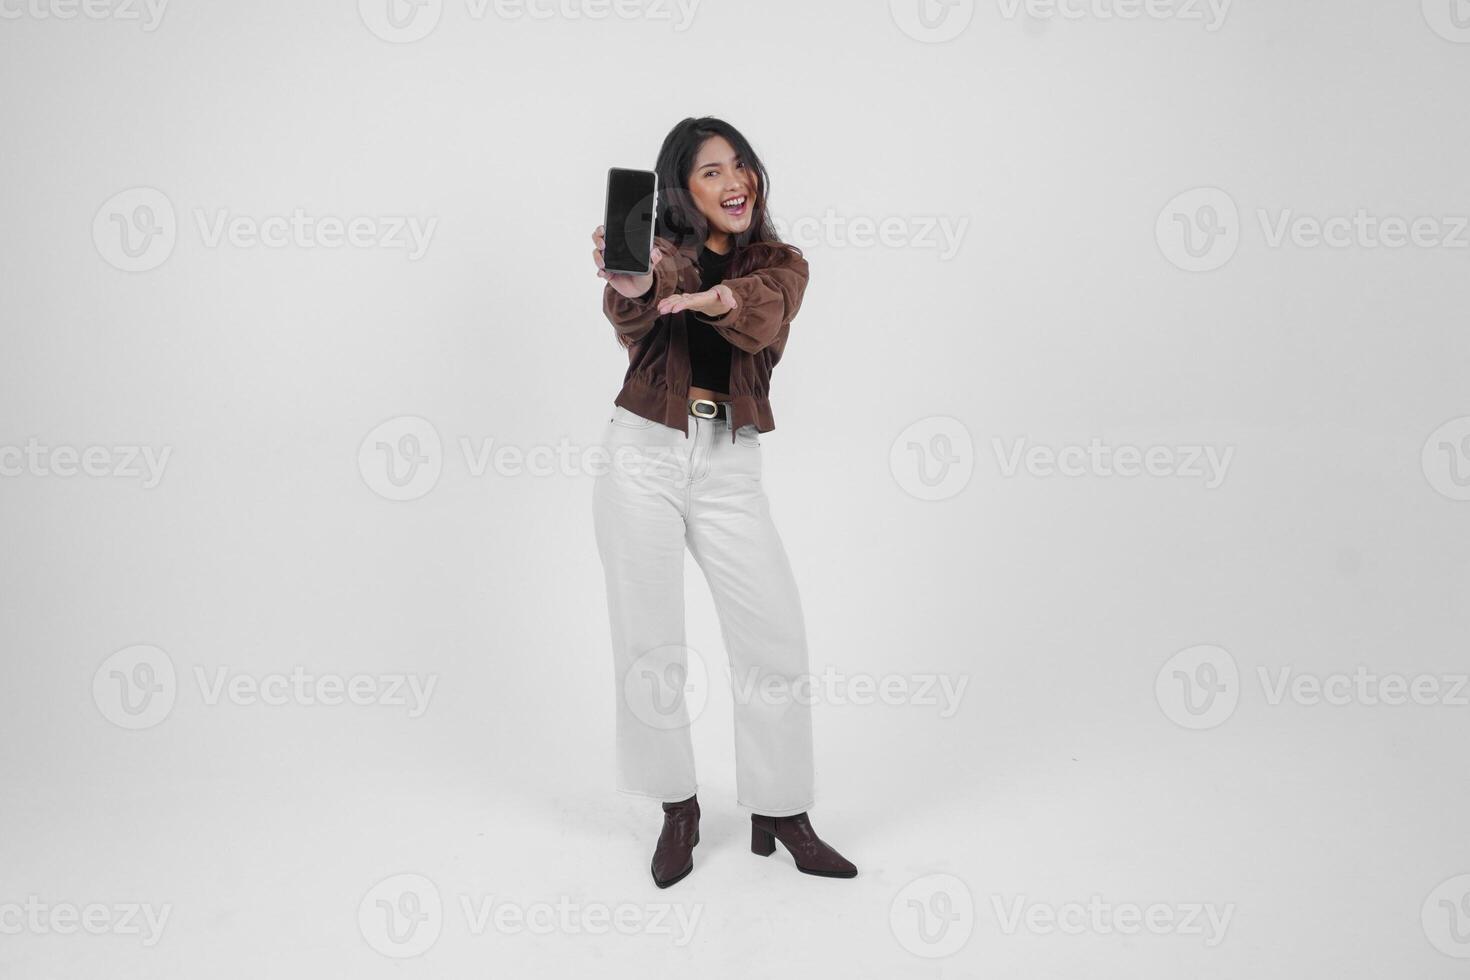 Young Asian woman smiling wide looking happy and holding smartphone while wearing casual outfit standing on isolated white background photo